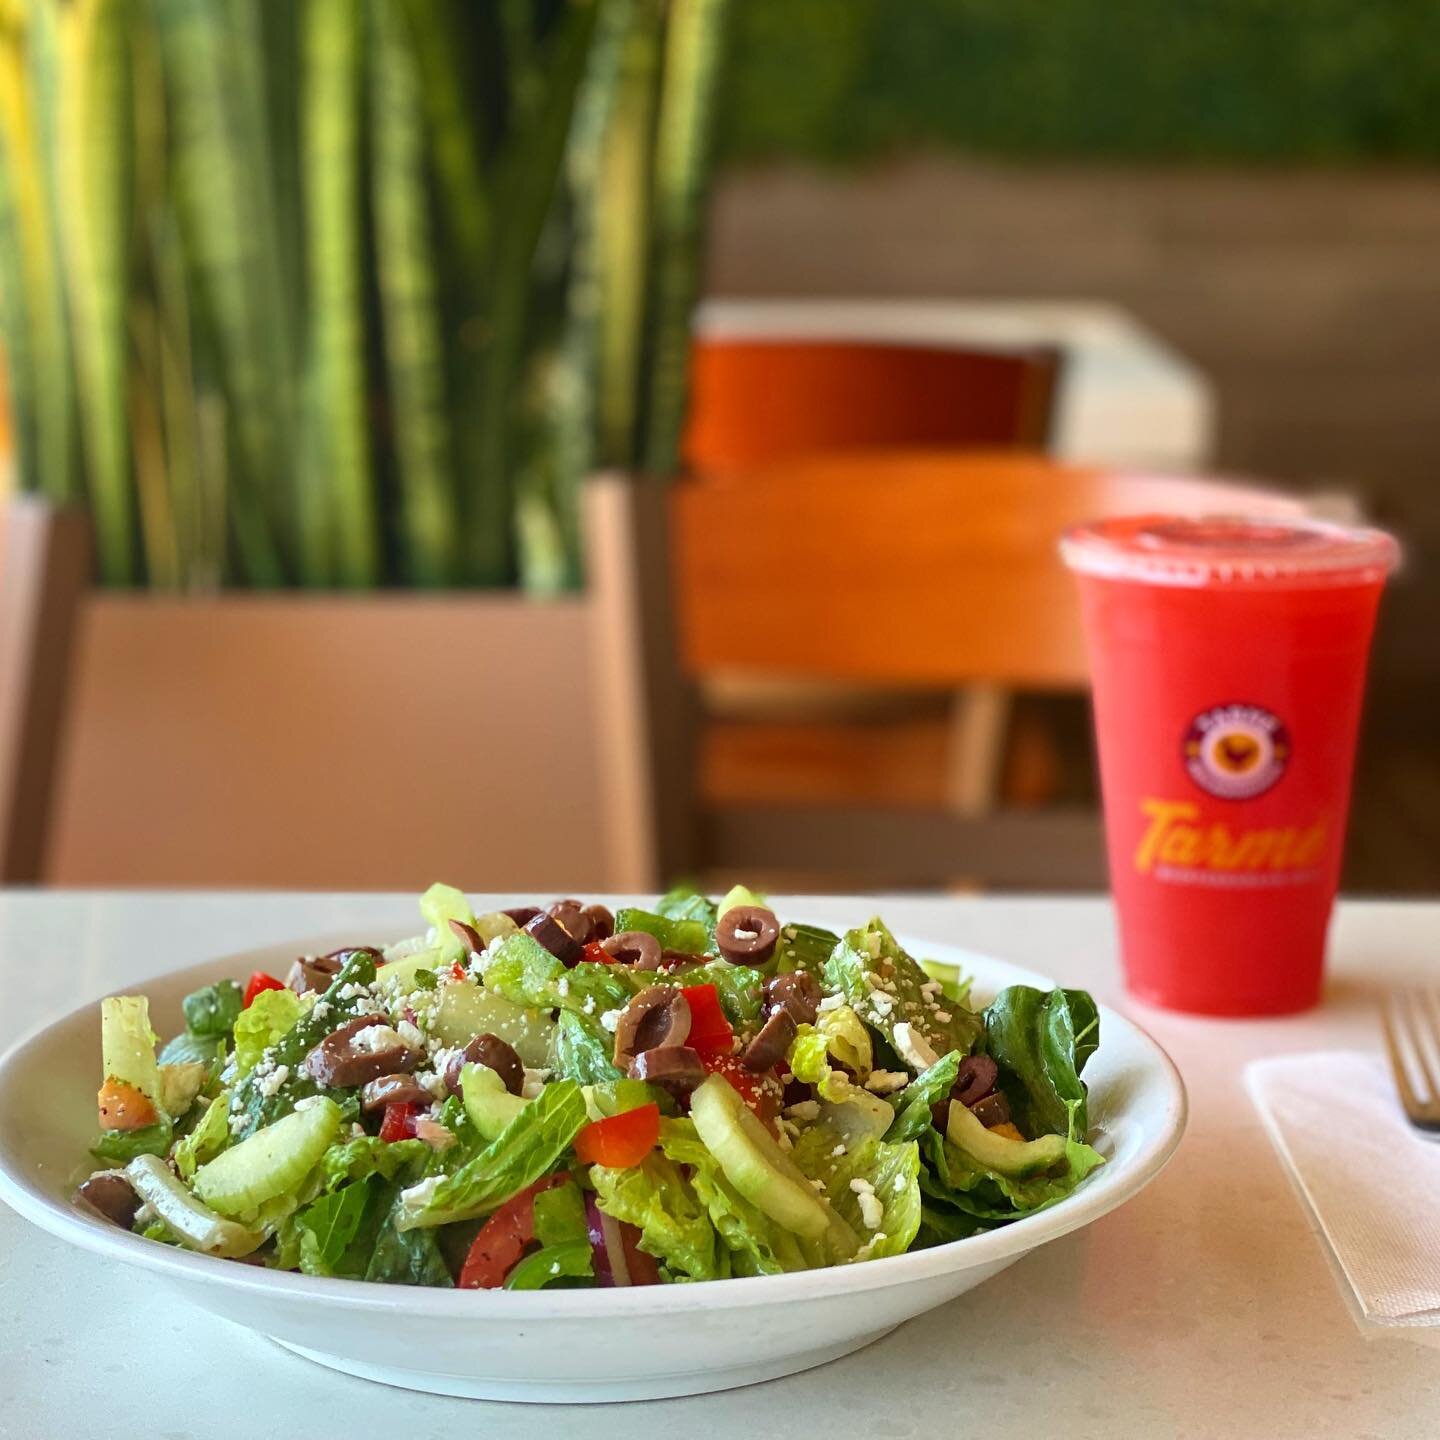 Keeping it fresh and light today with our flavorful traditional Greek Salad &amp; Strawberry Refresher 🍓